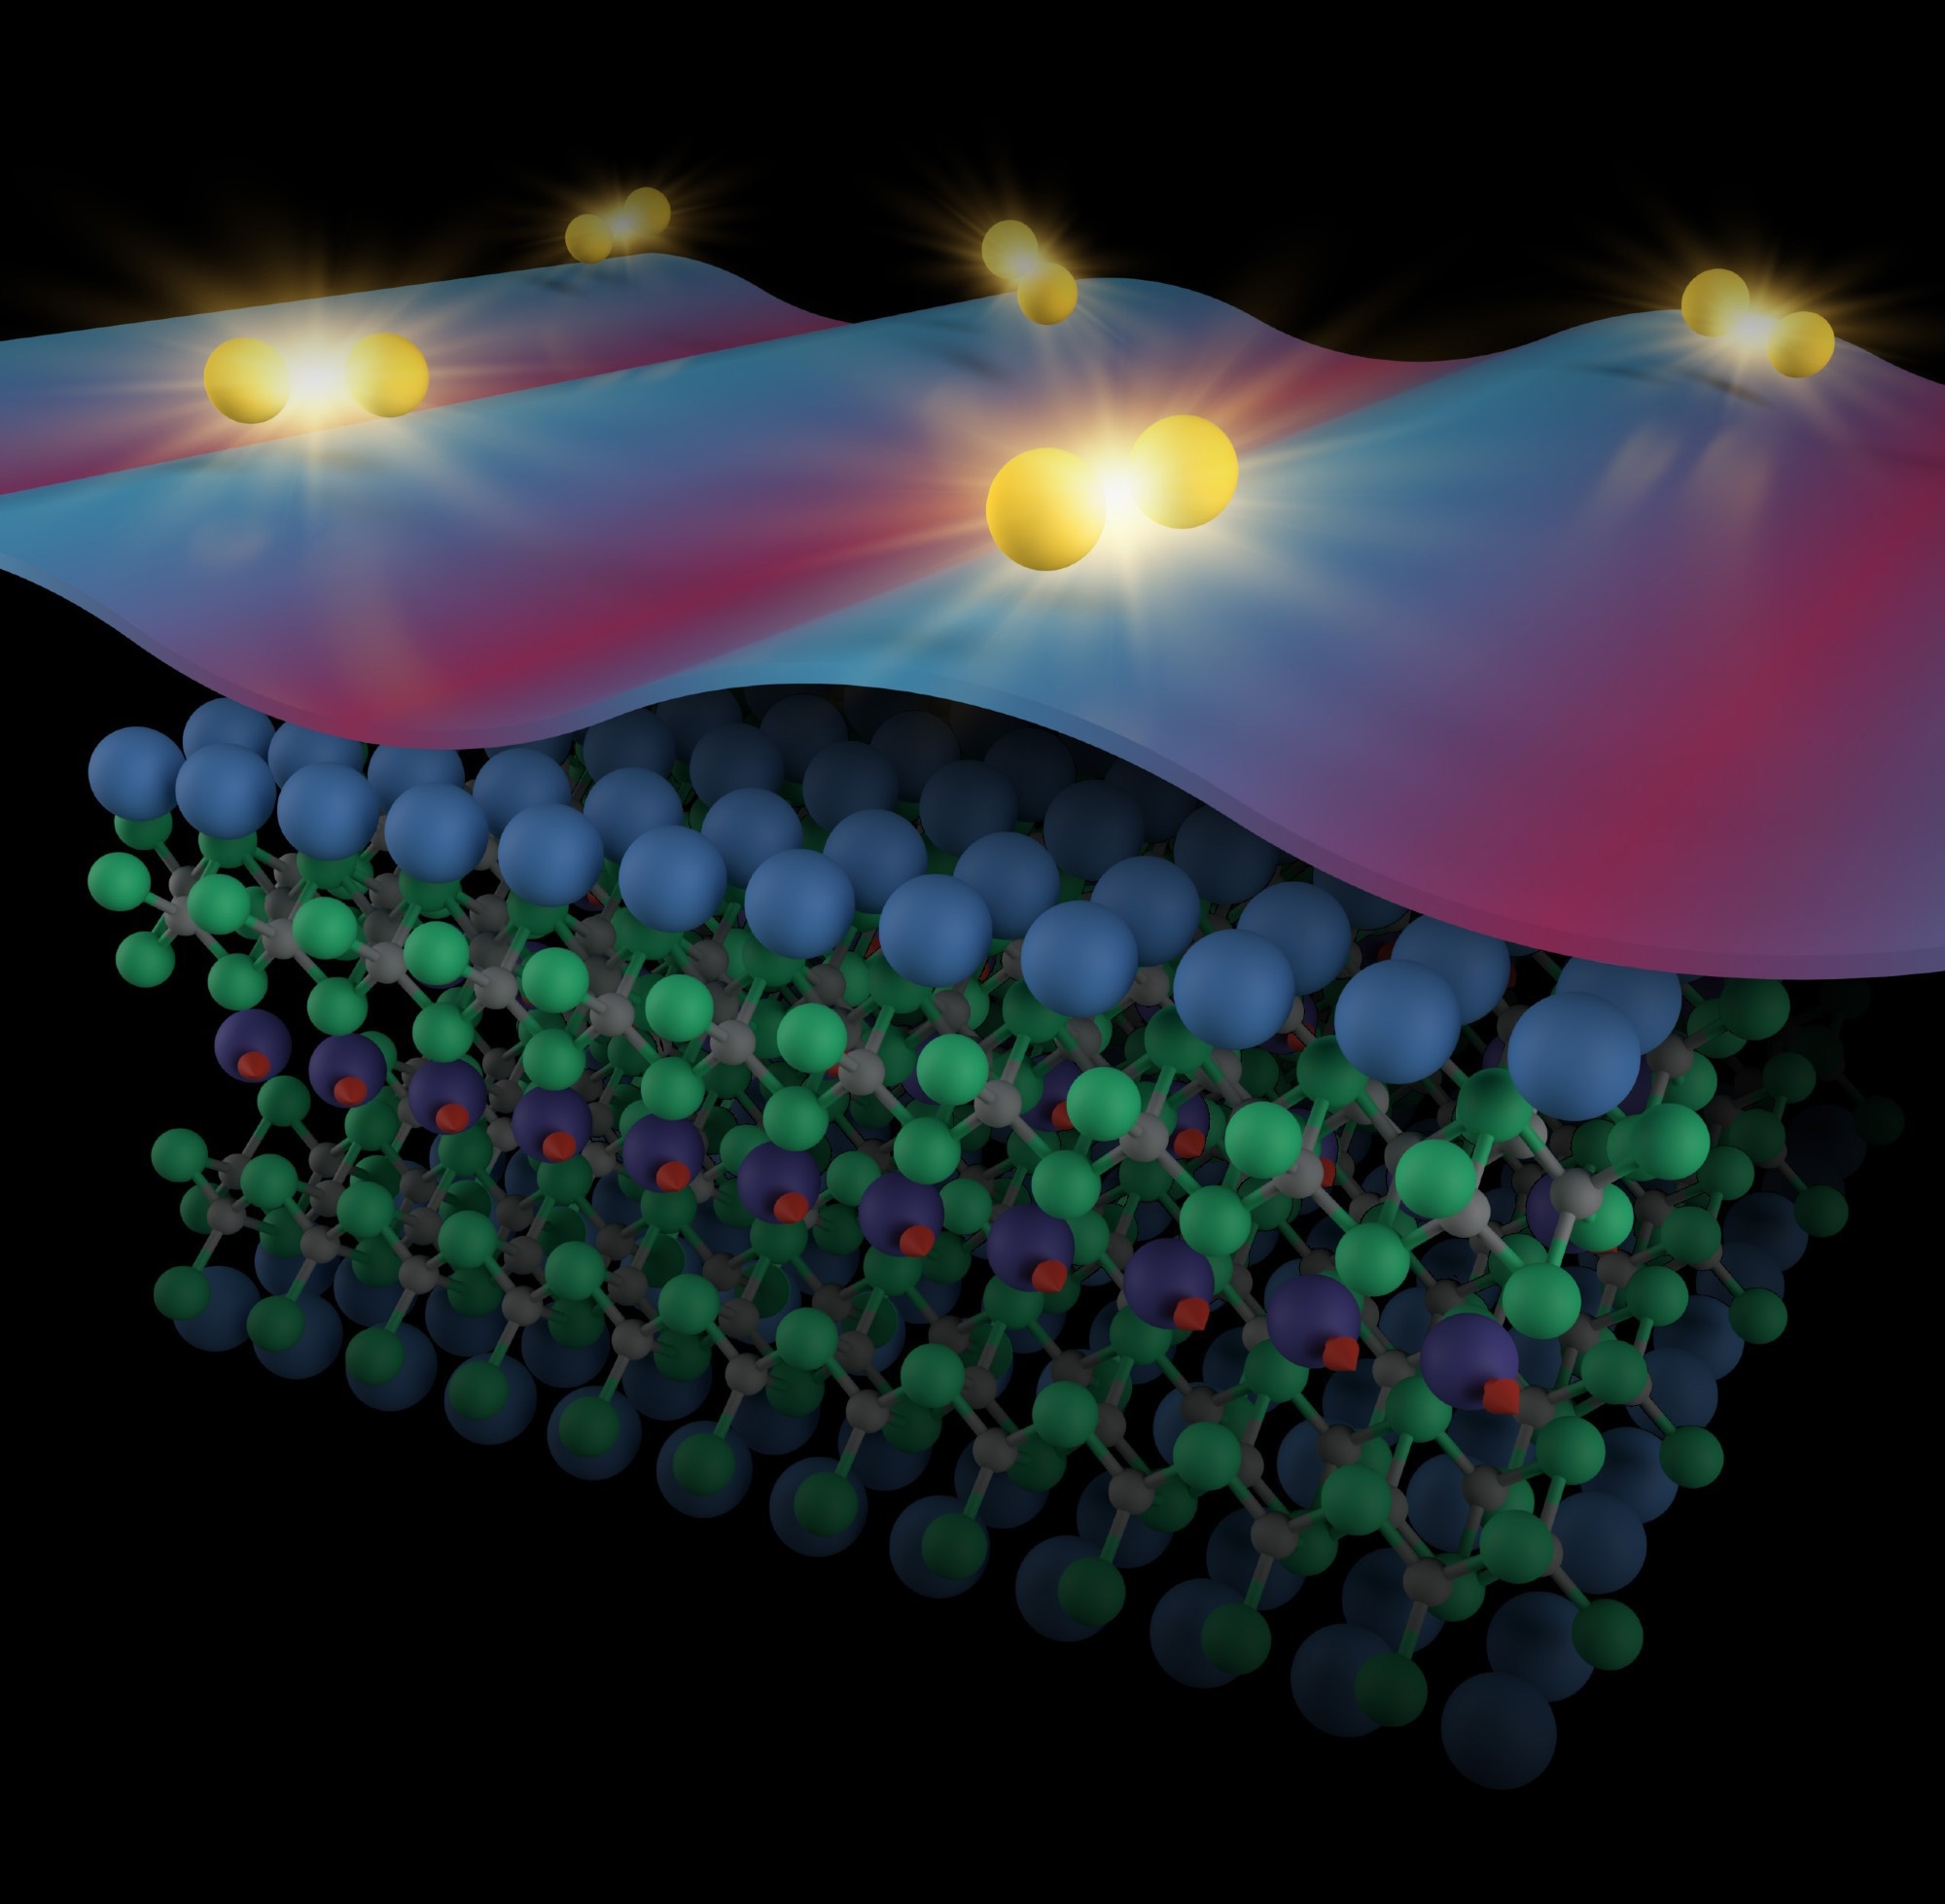 In this illustration of the superconducting material Eu-1144, the blue and magenta wave shown above the crystal lattice represents how the energy level of the electron pairs (yellow spheres) spatially modulates as these electrons move through the crystal.